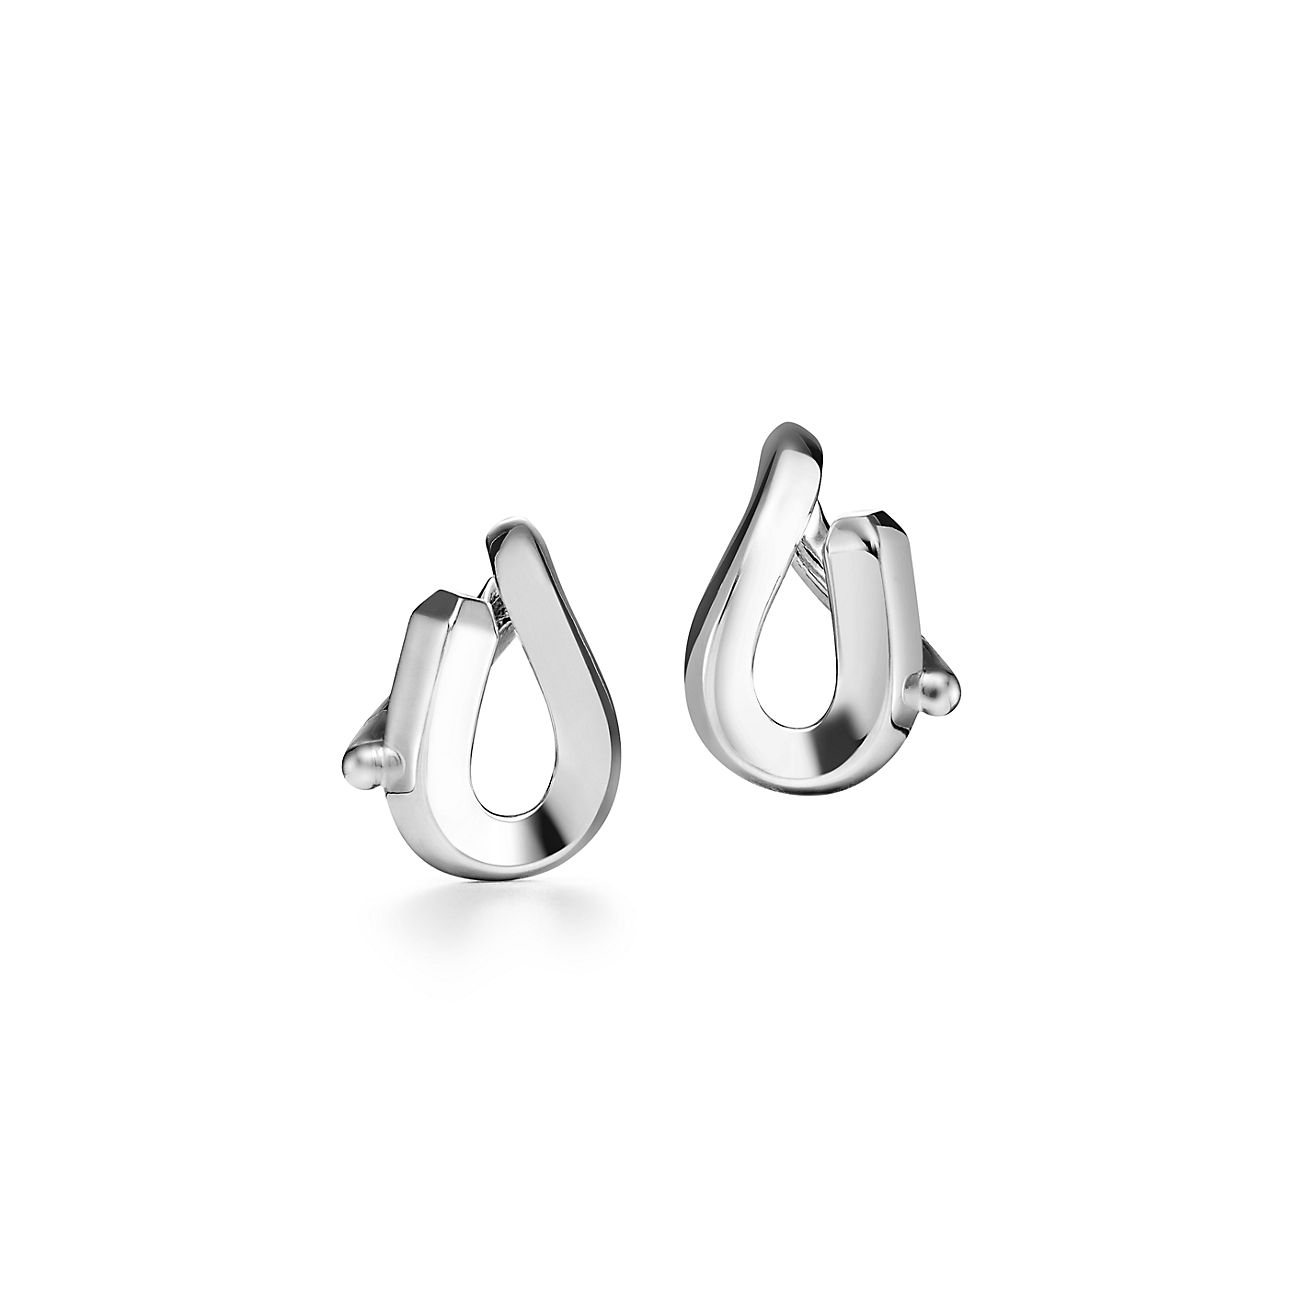 Tiffany Forge Single-link Earrings in High- polished Sterling Silver 